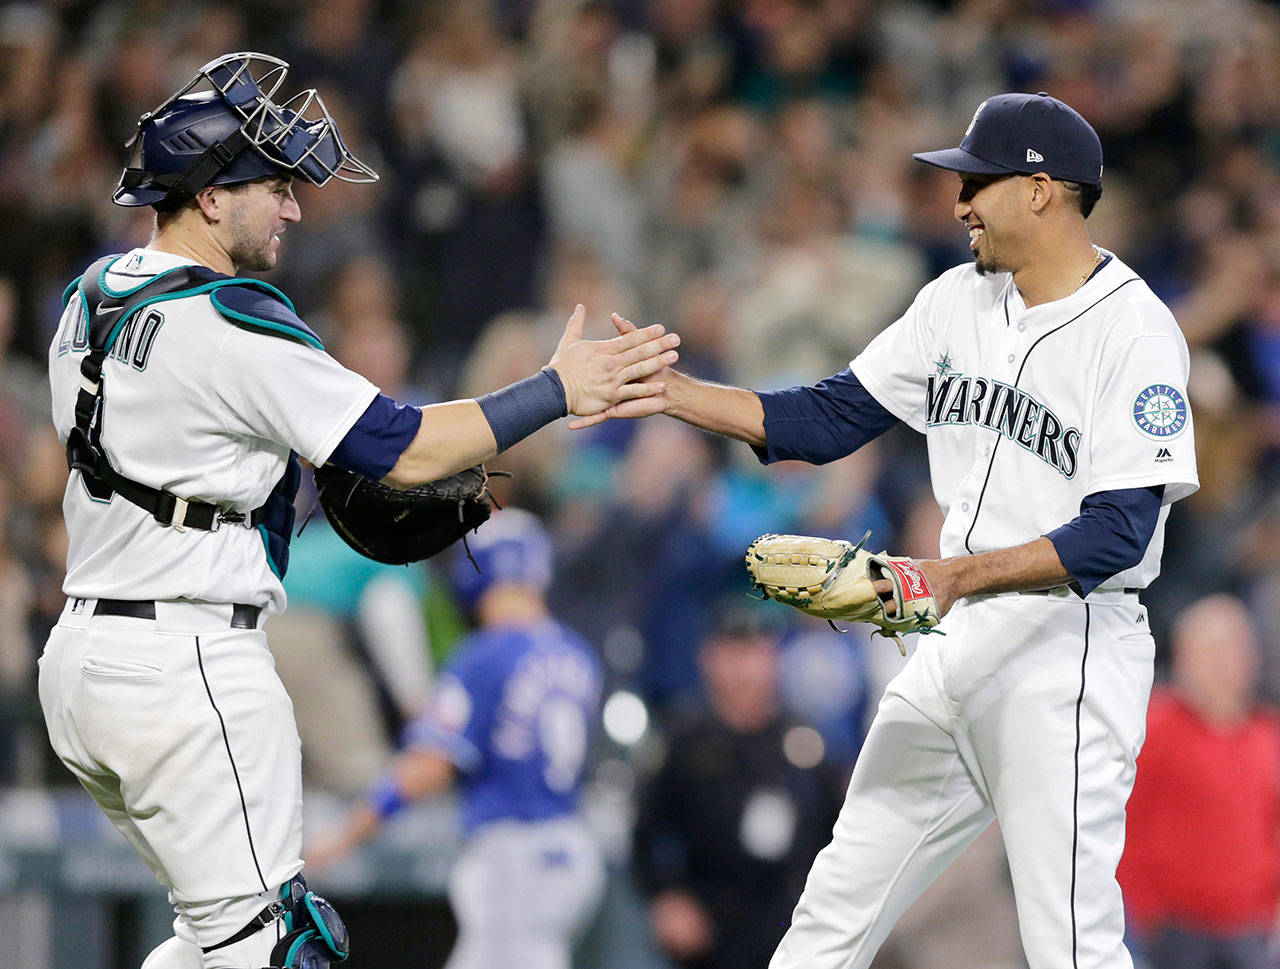 Seattle’s Edwin Diaz (right) is greeted by catcher Mike Zunino after closing out the Mariners’ Sept. 29 win over Texas in Seattle. Diaz’s ascension to stardom was a bright spot for Seattle in 2018. (AP Photo/John Froschauer)